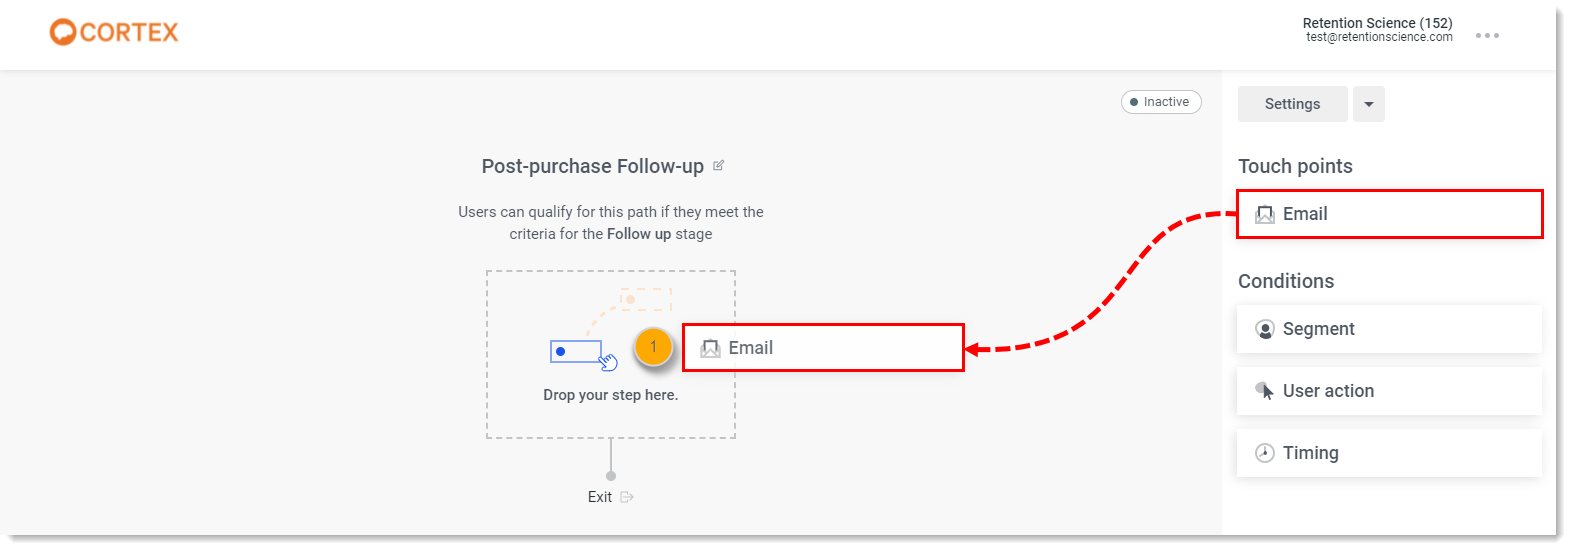 paths-touch-points-drag-and-drop-email-step-step1.png